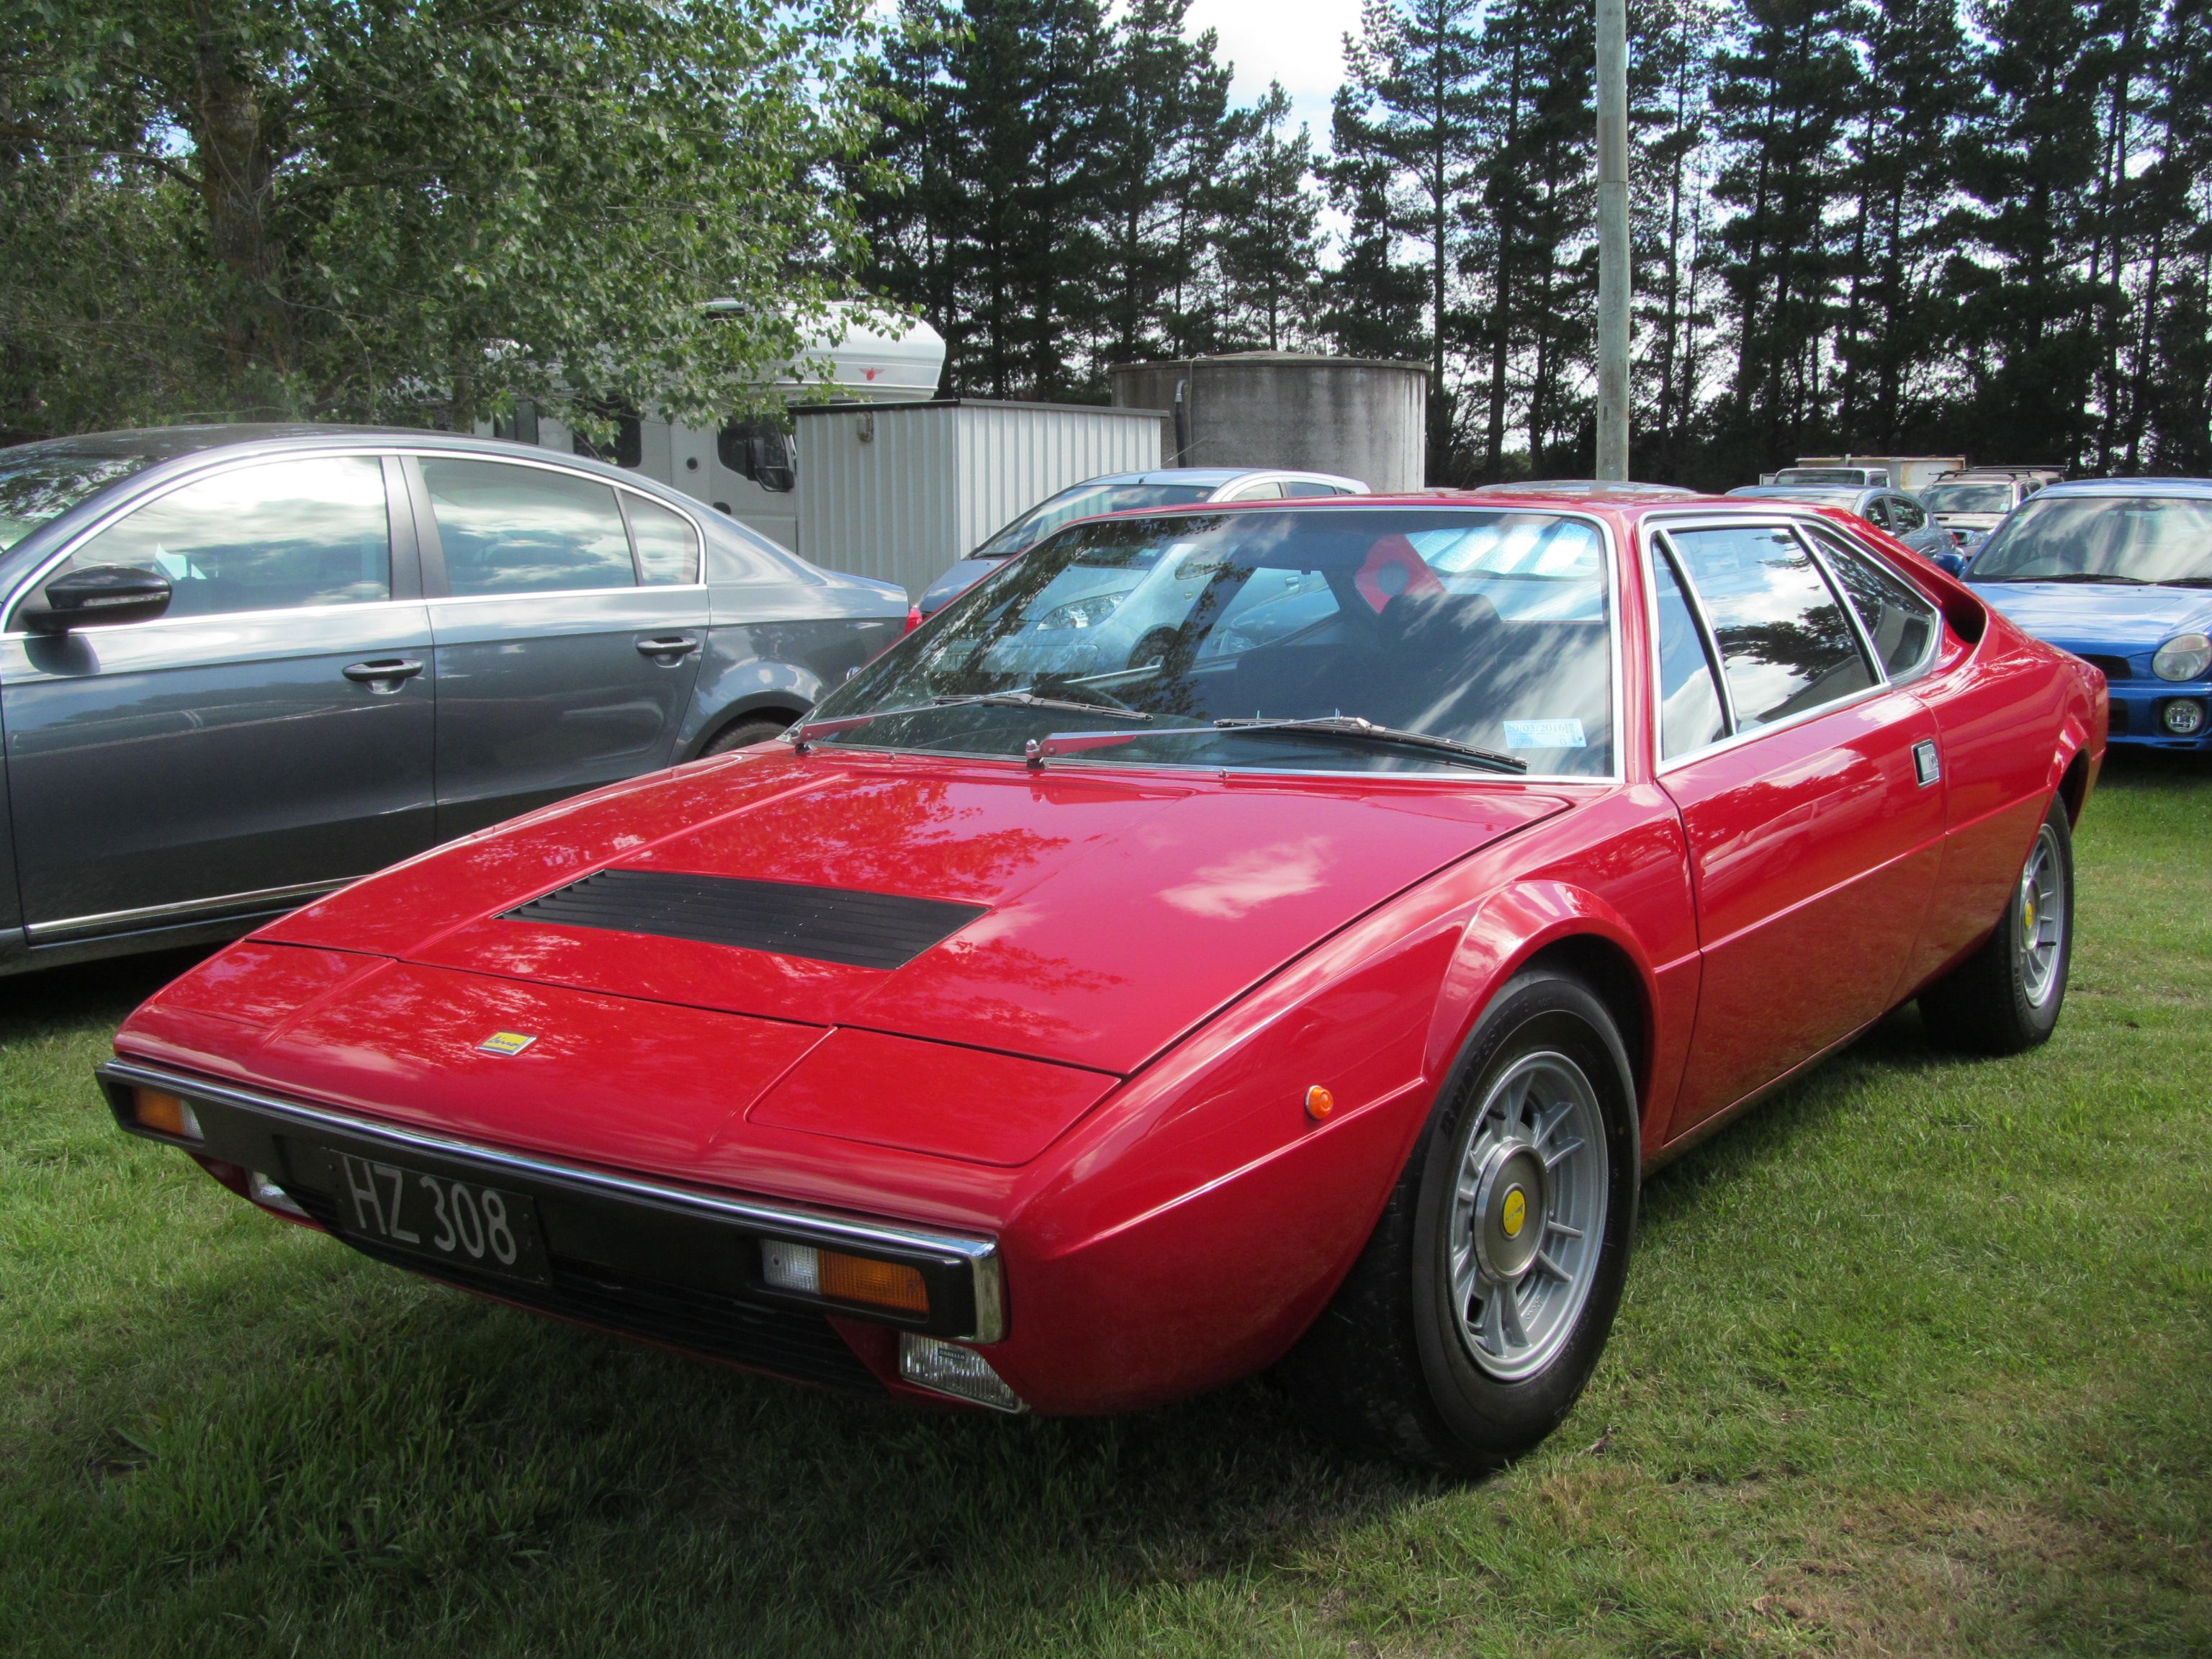 The Ferrari 208 GT4 was specifically designed to provide Italians with a sports car whose engine displacement did not exceed two liters